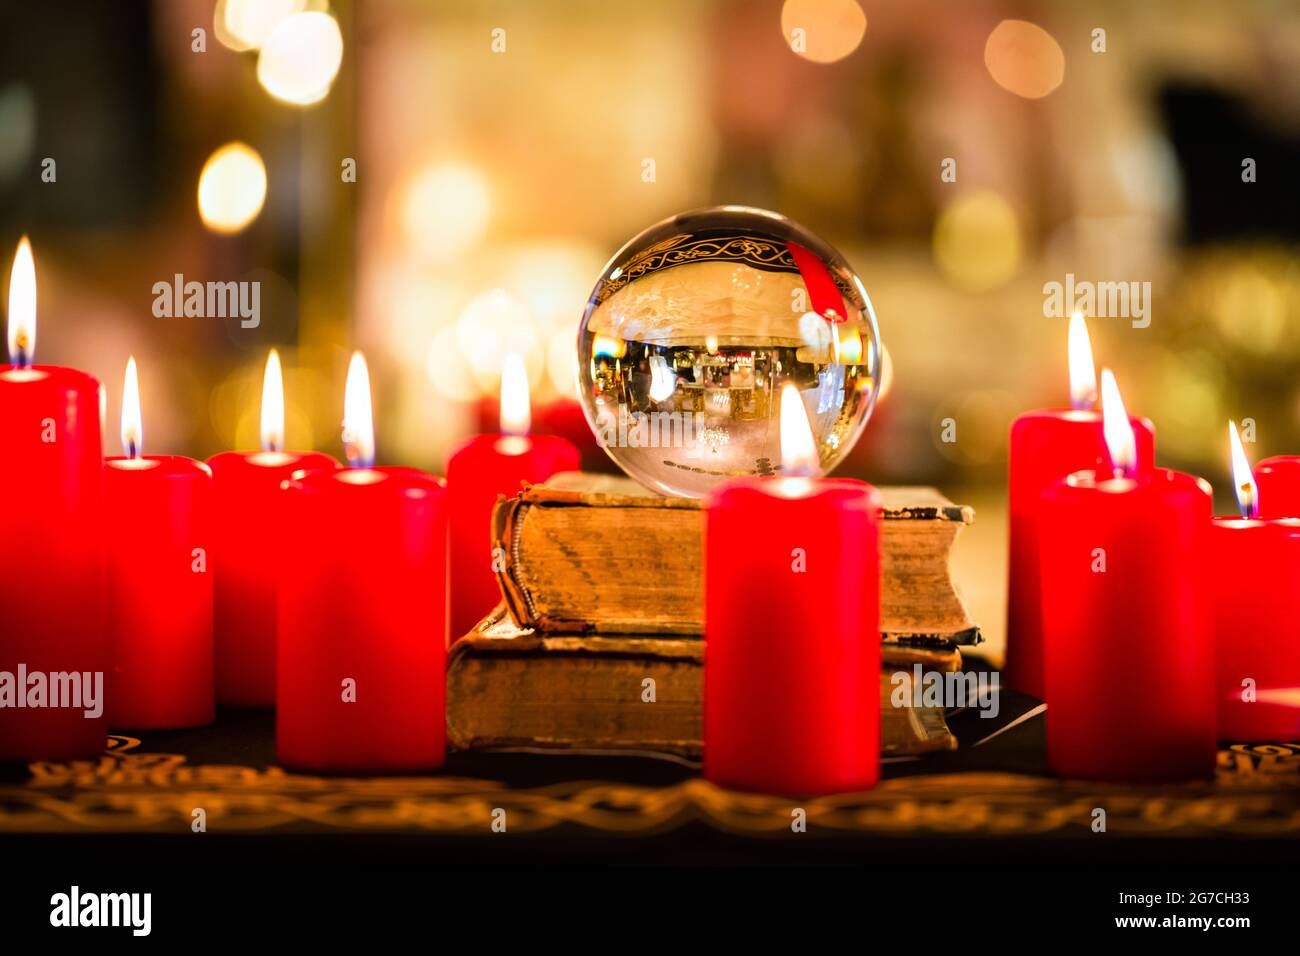 Crystal ball to prophesy or esoteric clairvoyance during a Seance in the candle light Stock Photo